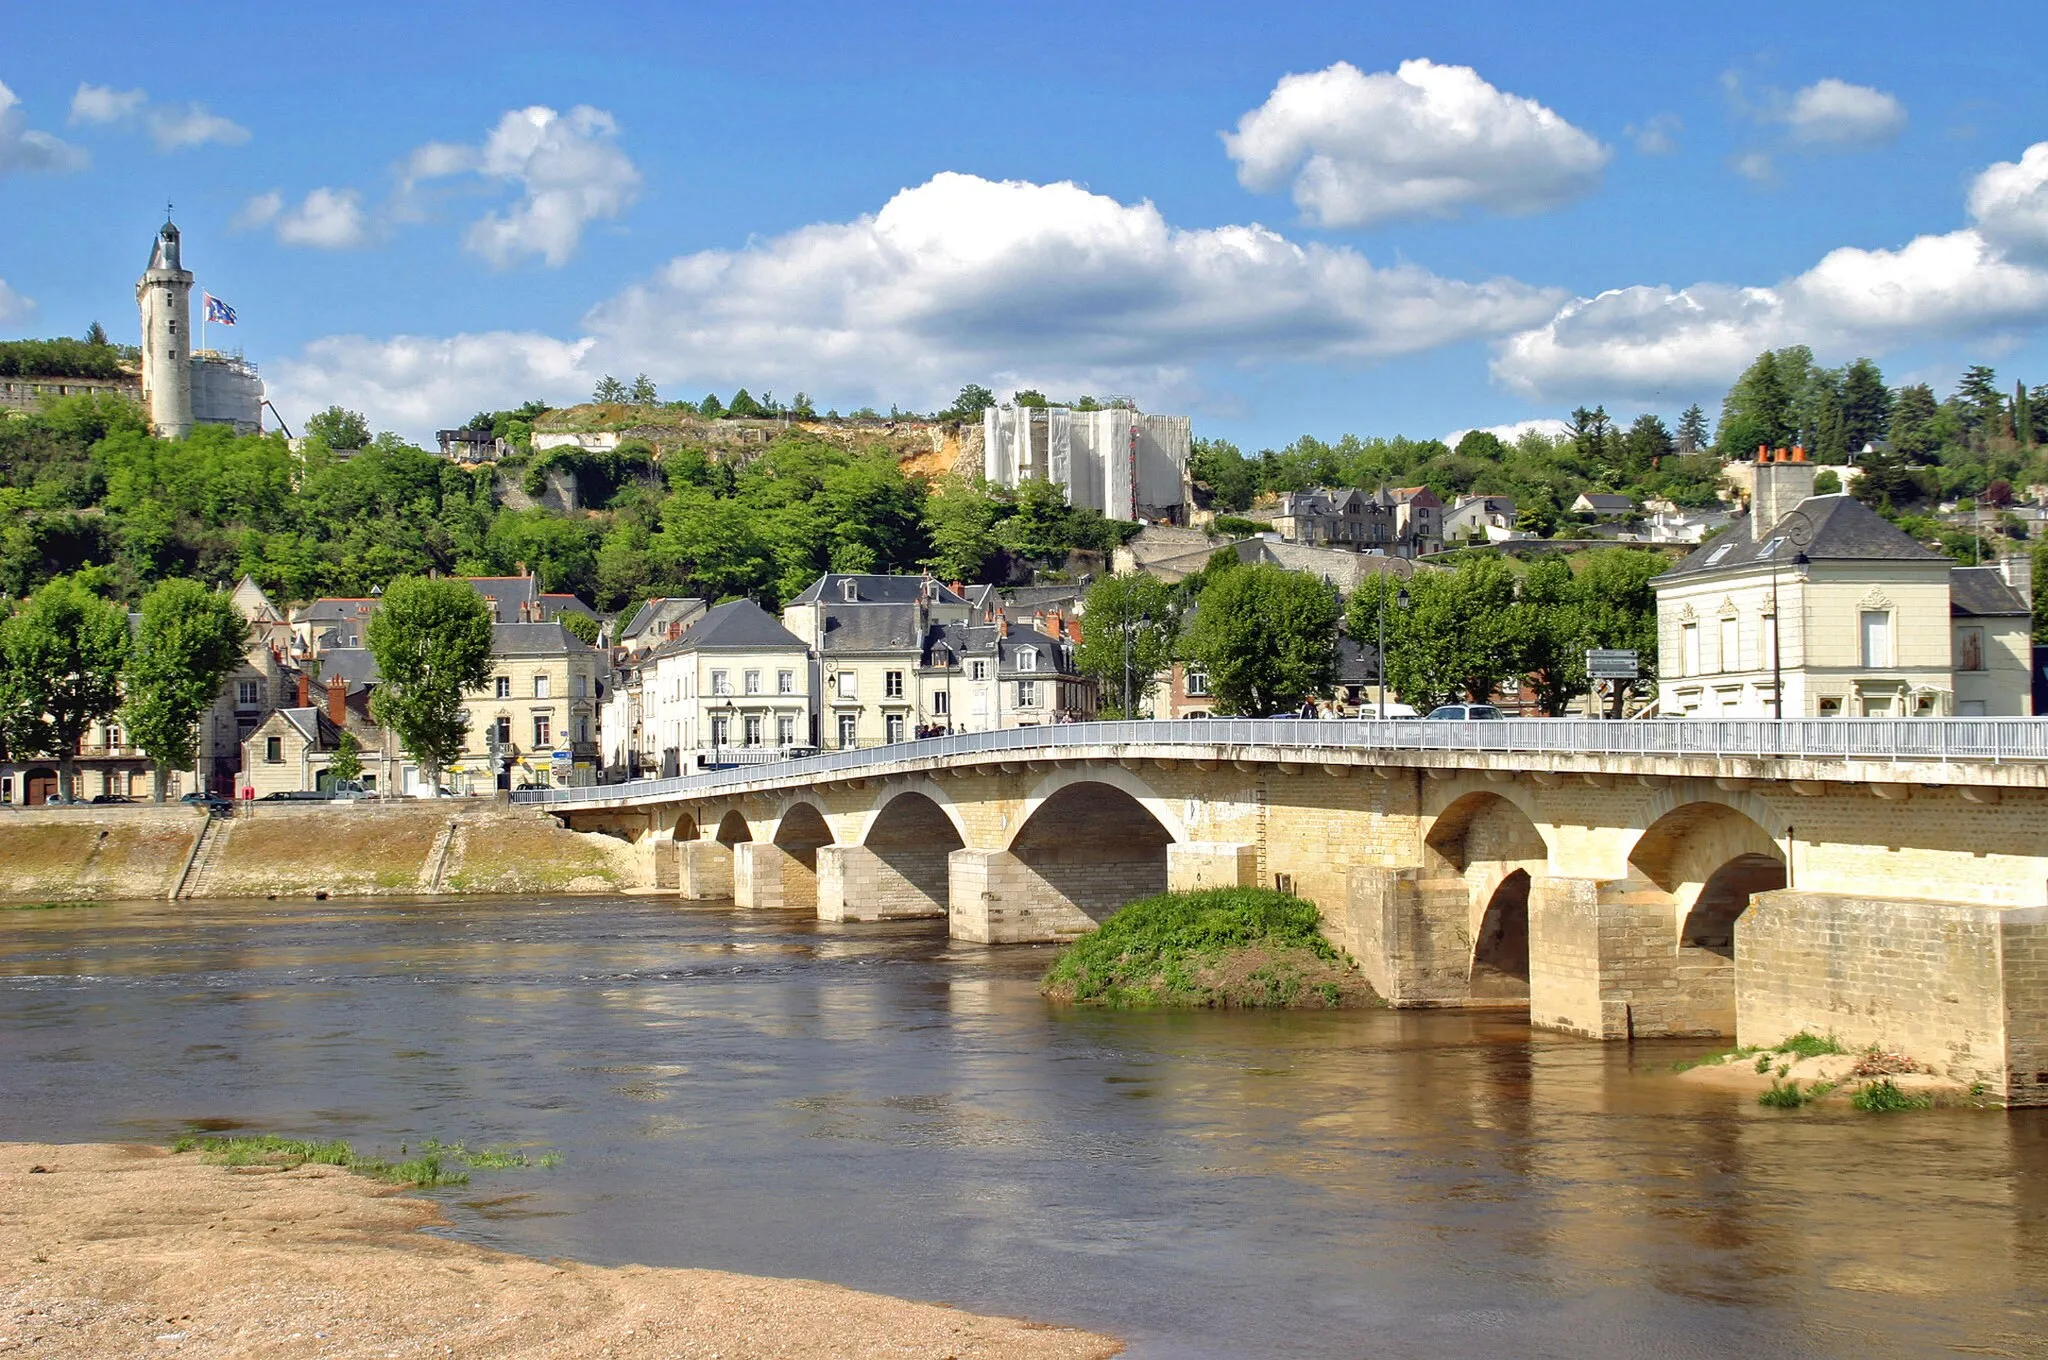 Photo showing: Chinon - View over the river Vienne to the ruins of Chinon Castle. The town with about 8100 inhabitants is located in the Région Center-Val de Loire, France